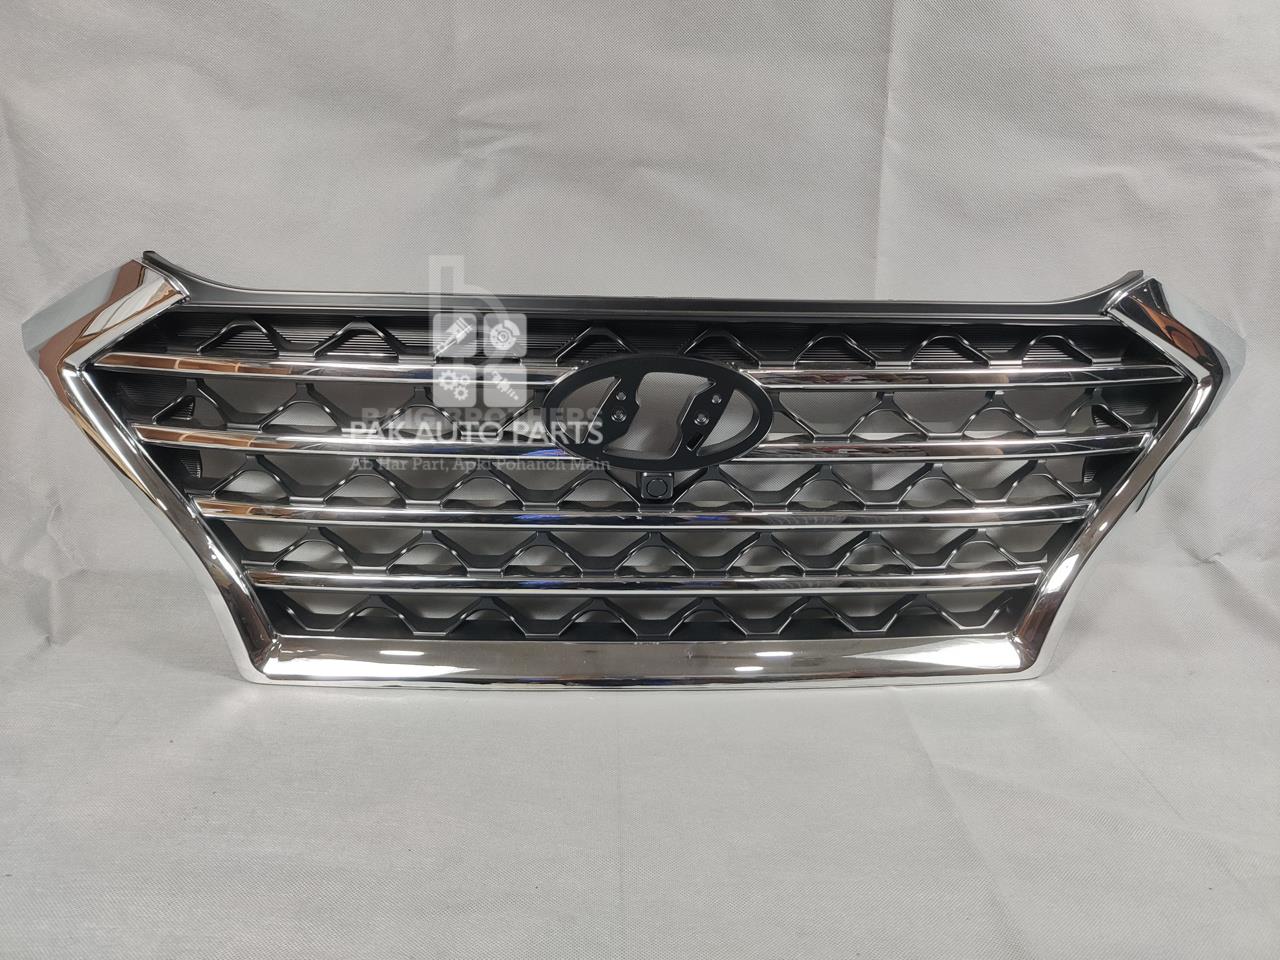 Picture of Hyundai Tucson Show Grille